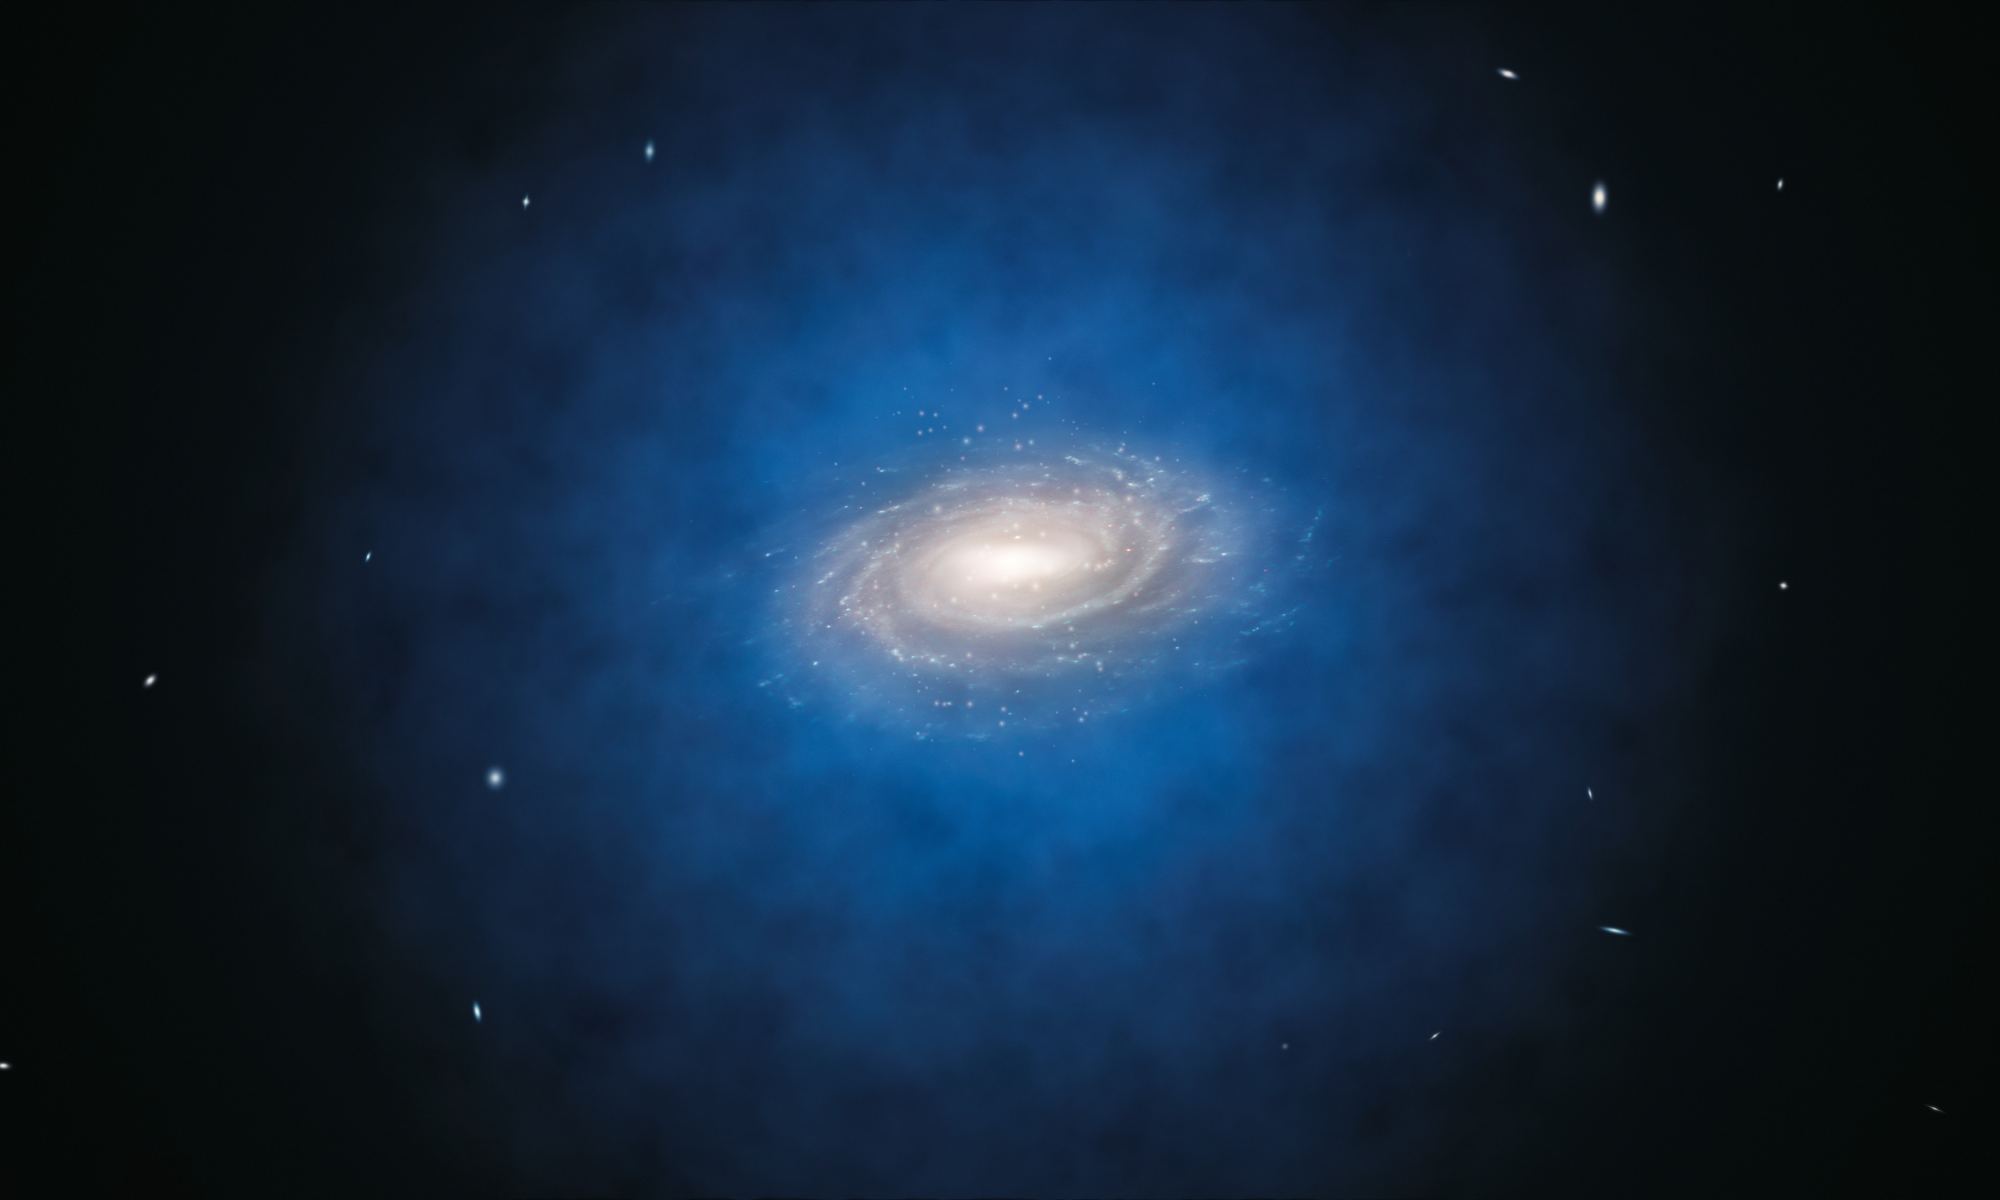 Artist rendering of the dark matter halo surrounding our galaxy. For quasars, the dark matter halos are much more massive. Credit: ESO/L. Calçada